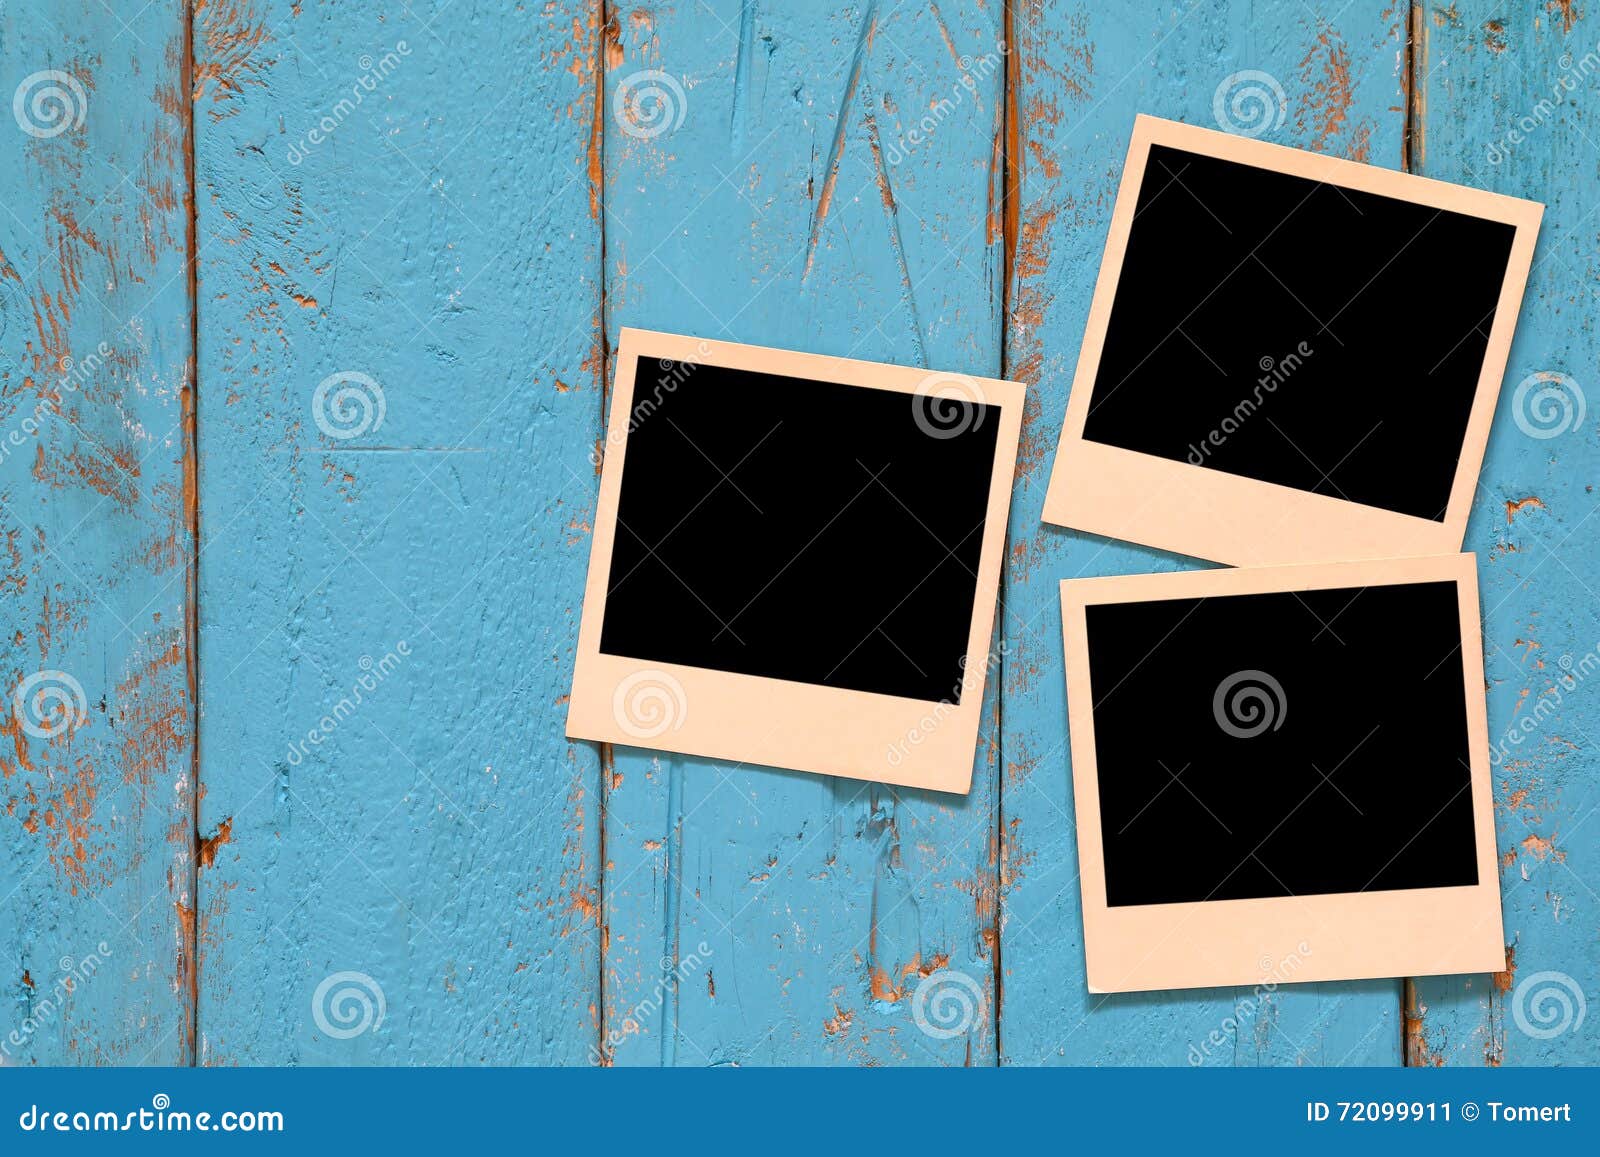 Top view of blank instant polaroid photos album on wooden blue background. vintage filtered image. ready to put images